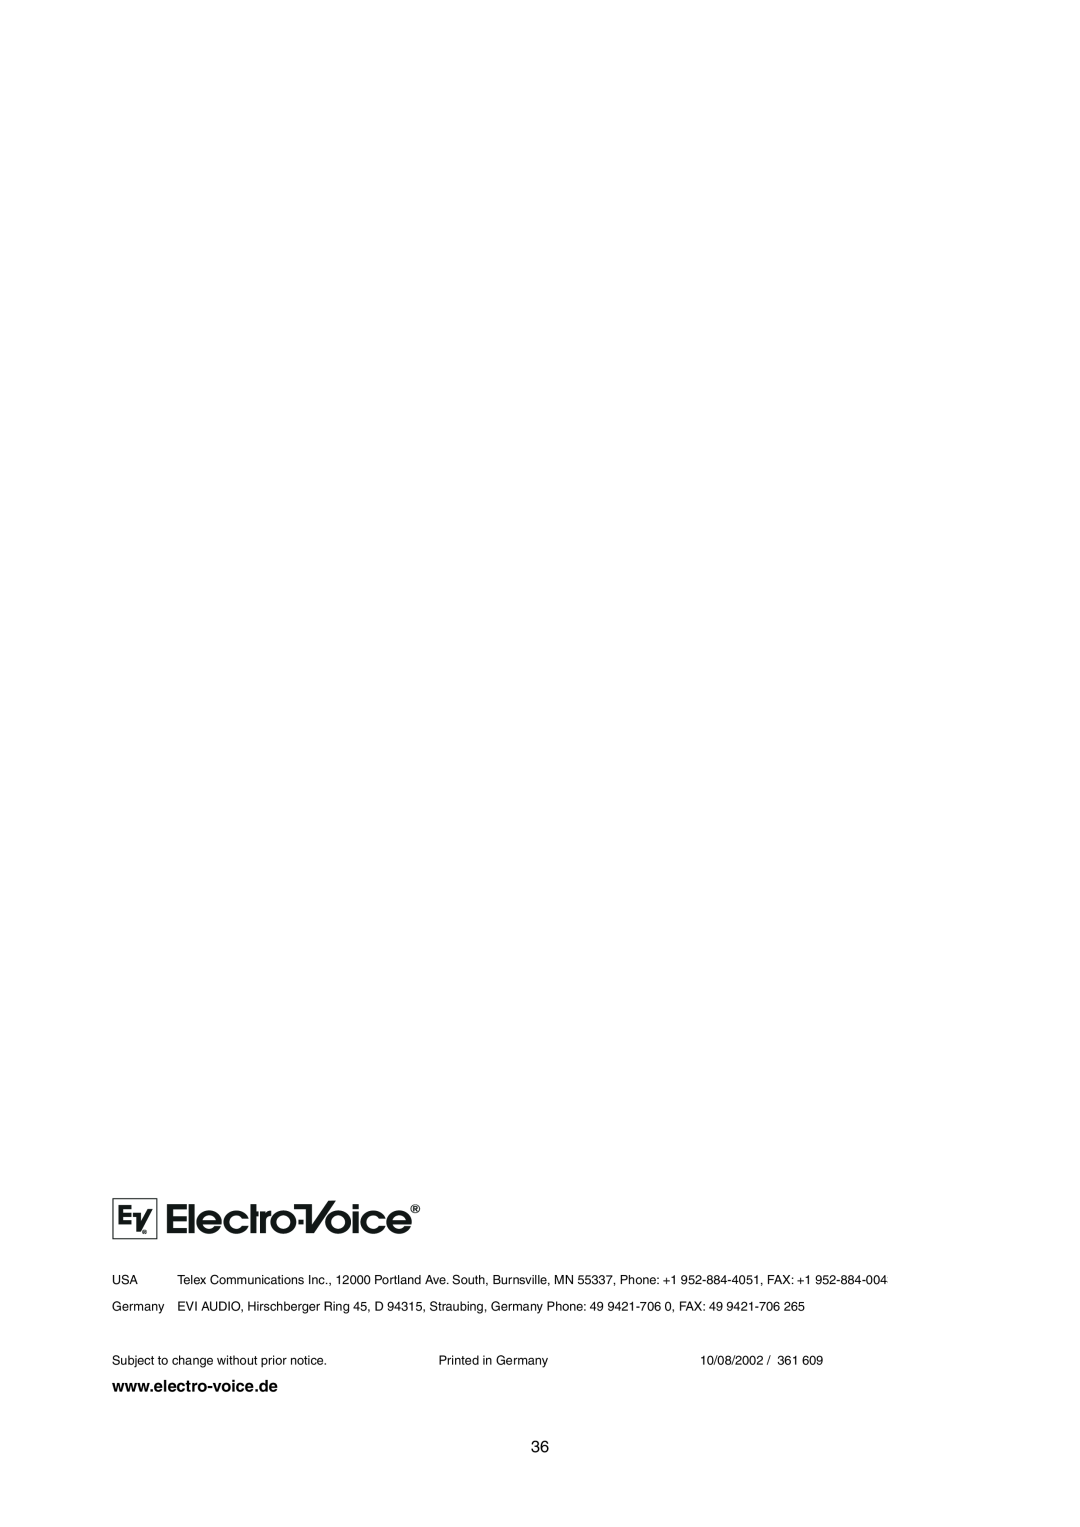 Electro-Voice P900RL, P1200RL owner manual Germany, Subject to change without prior notice, 10/08/2002 